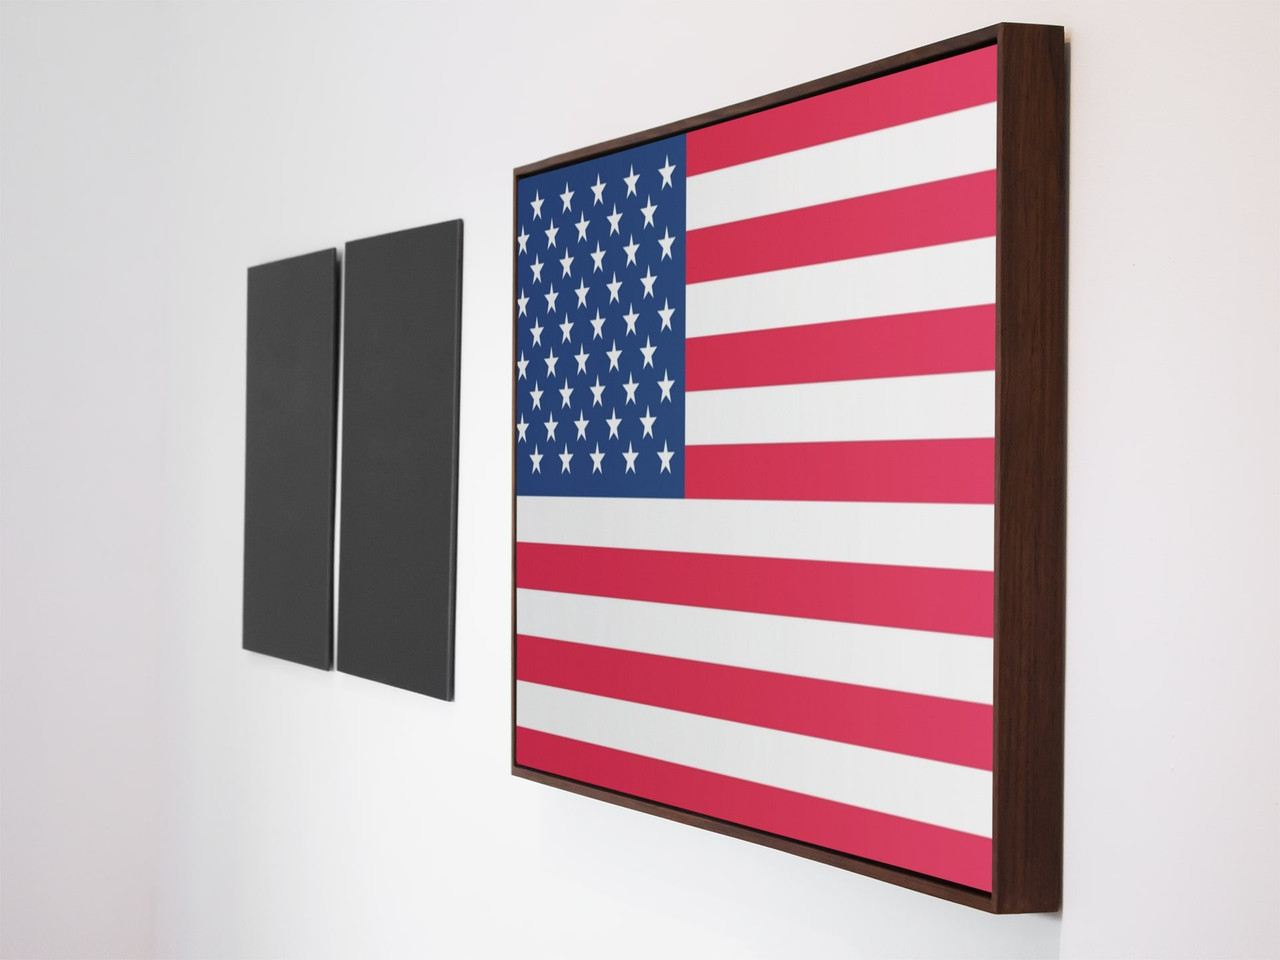 United Modern Poster Poster Wall Cool American Classy Photograph Art 18x12 State Print Art States Aesthetic Graphic - Decor Decor Print Flag American Canvas Picture Flag Room Cool Home Print US Wall